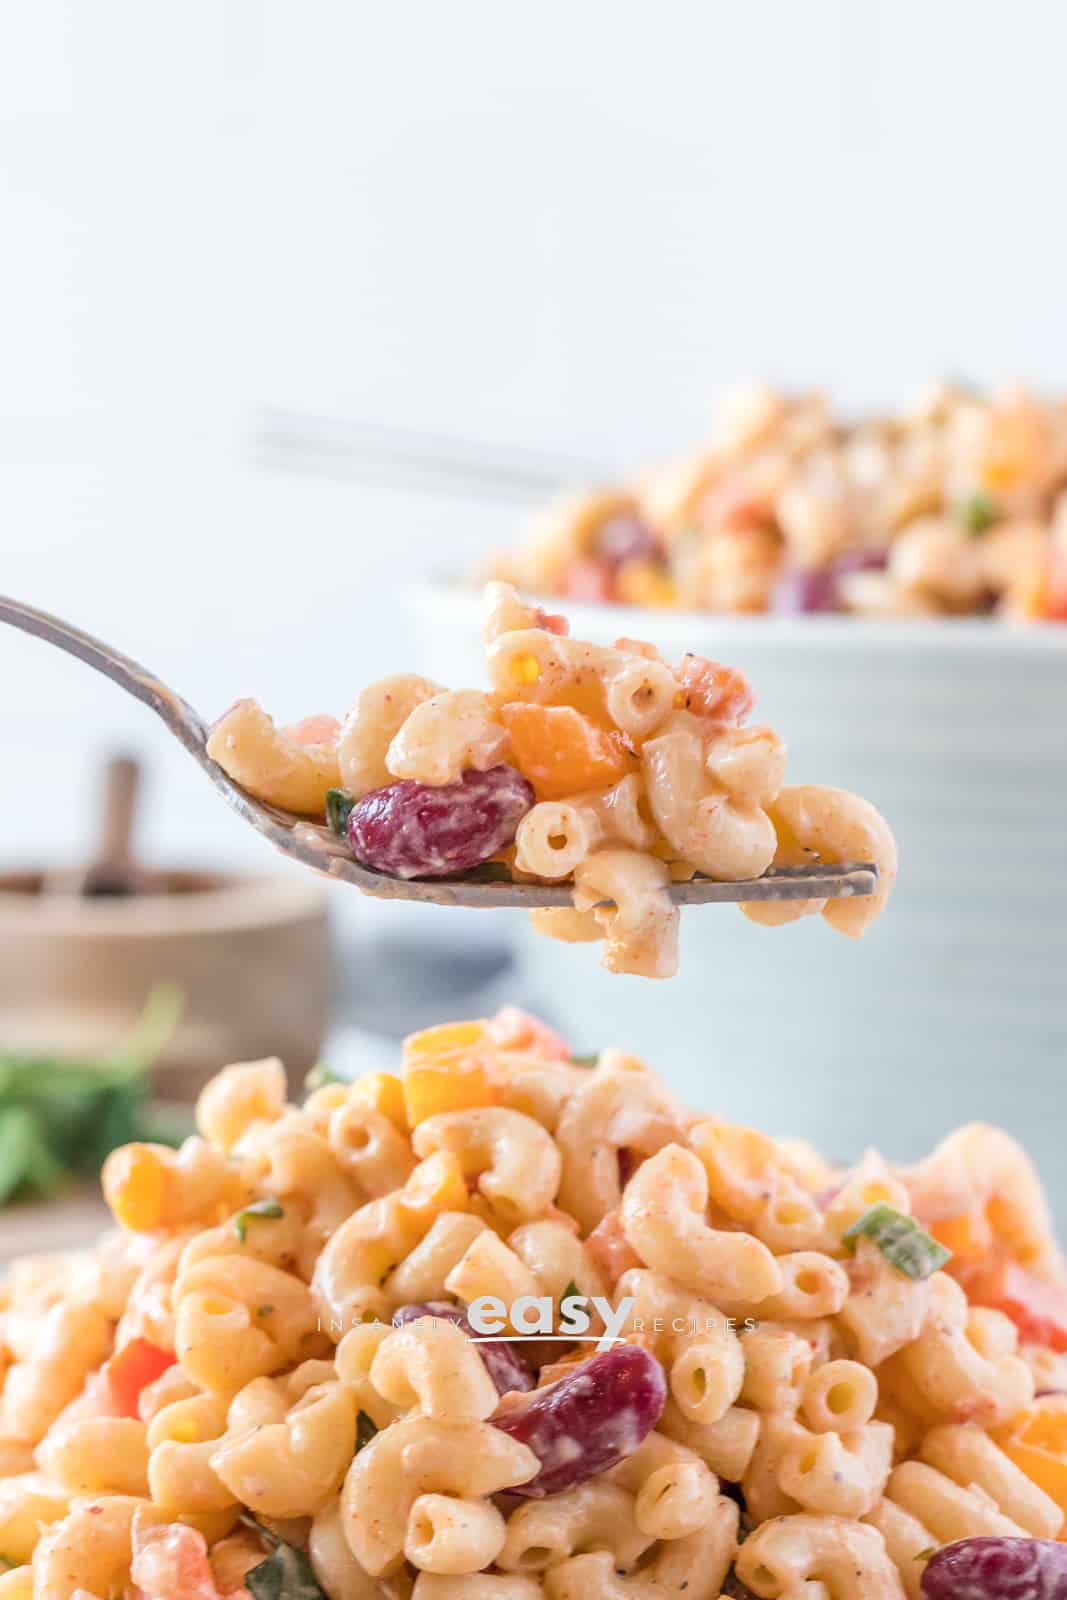 Closeup photo of a fork scooping up Vegan Macaroni Salad from a bowl. There is a white bowl with Vegan Macaroni Salad in the background.